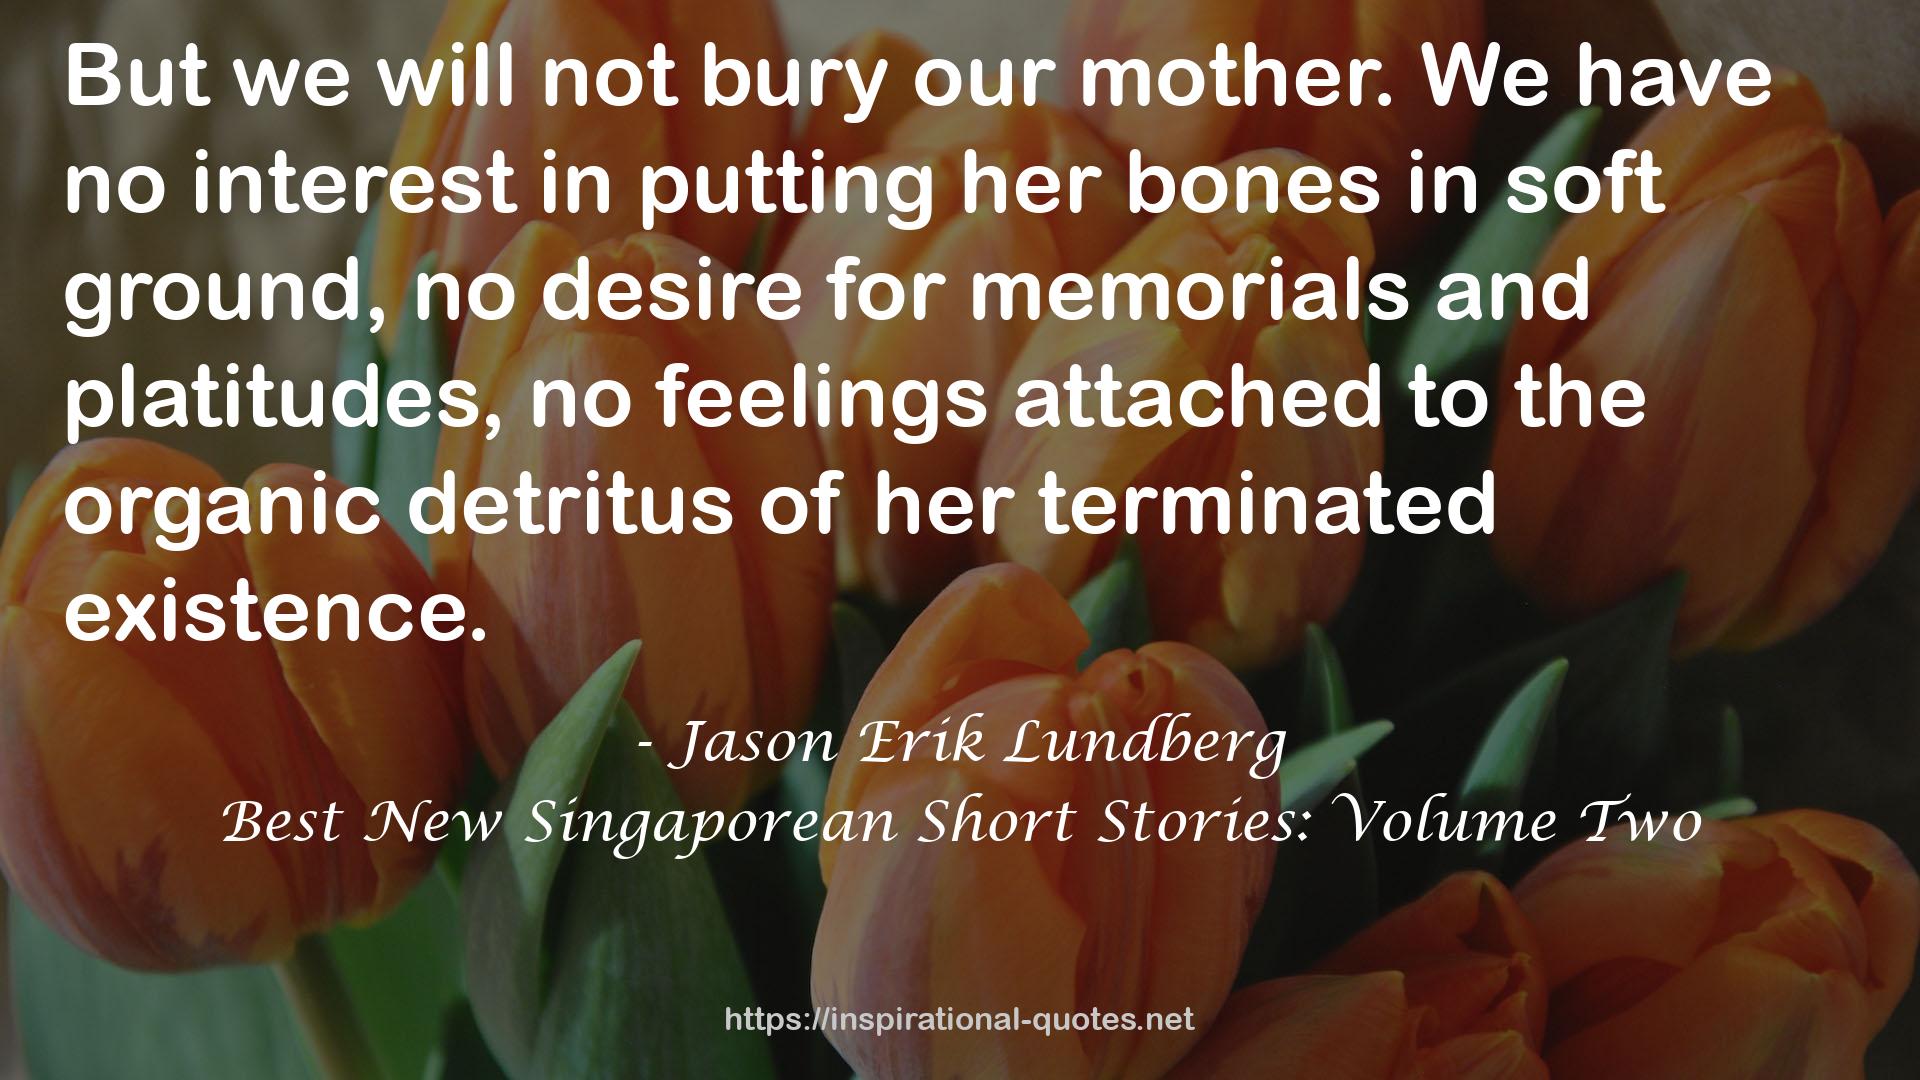 Best New Singaporean Short Stories: Volume Two QUOTES